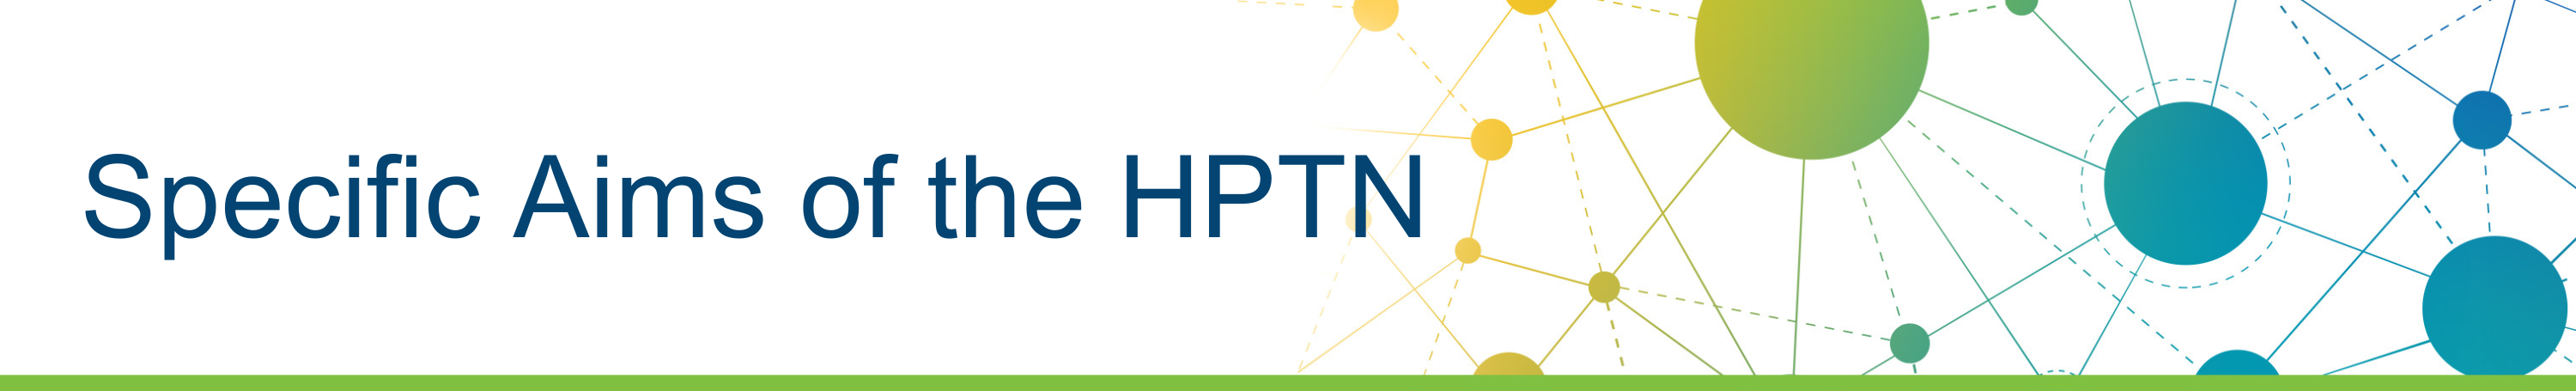 specific aims of the hptn